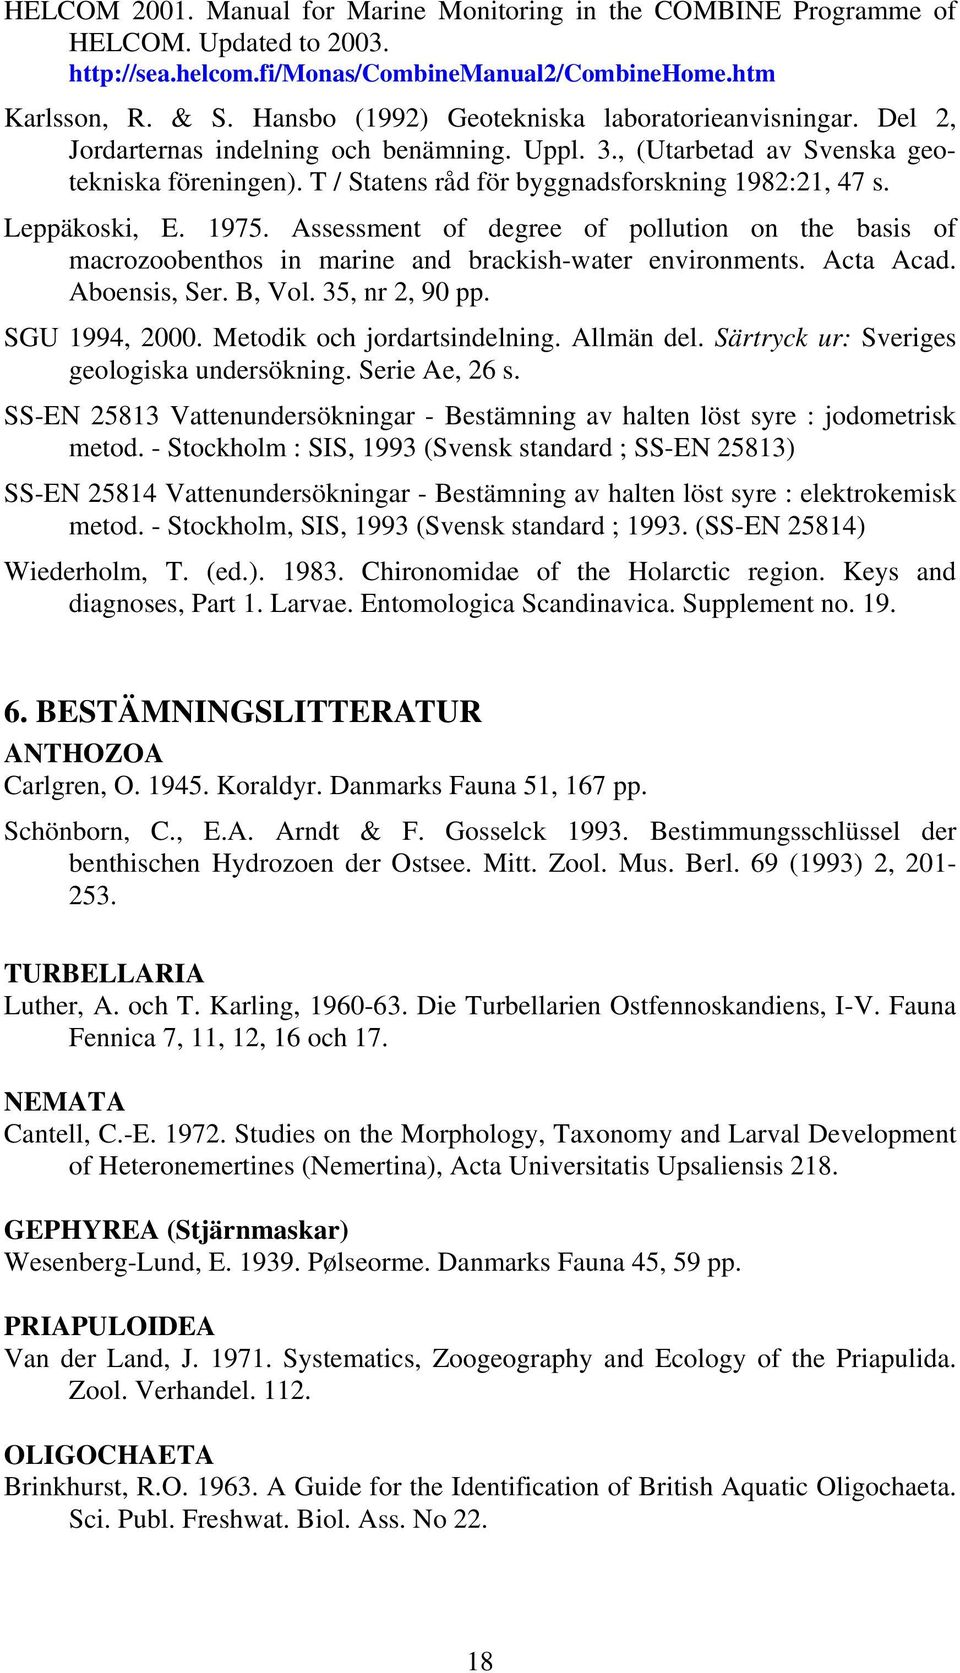 T / Statens råd för byggnadsforskning 1982:21, 47 s. Leppäkoski, E. 1975. Assessment of degree of pollution on the basis of macrozoobenthos in marine and brackish-water environments. Acta Acad.